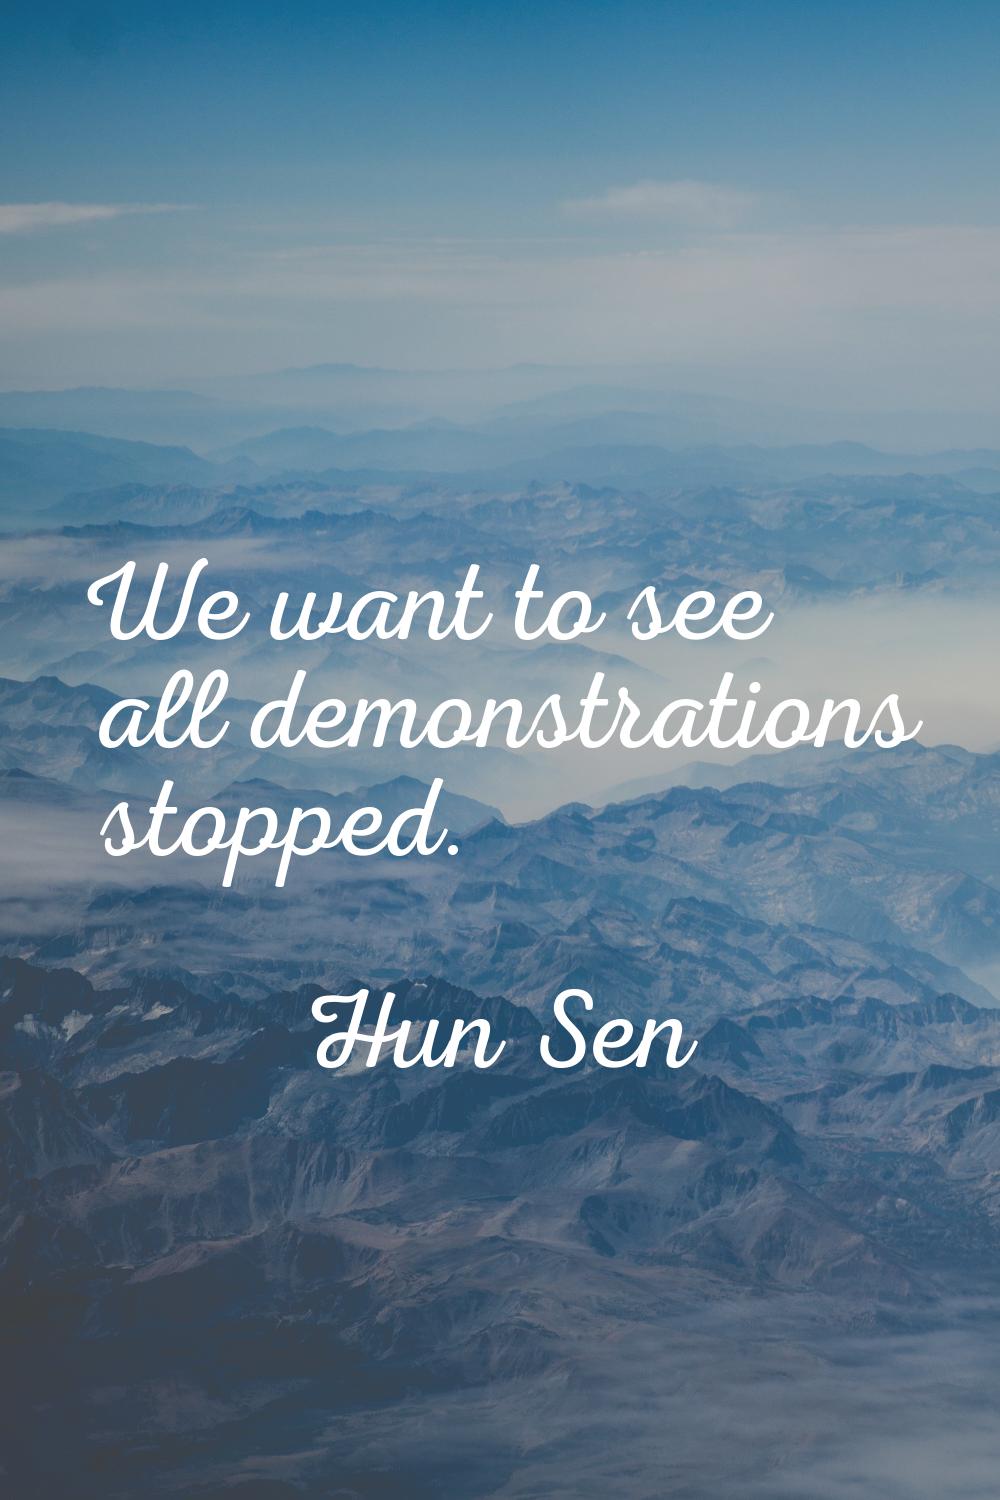 We want to see all demonstrations stopped.